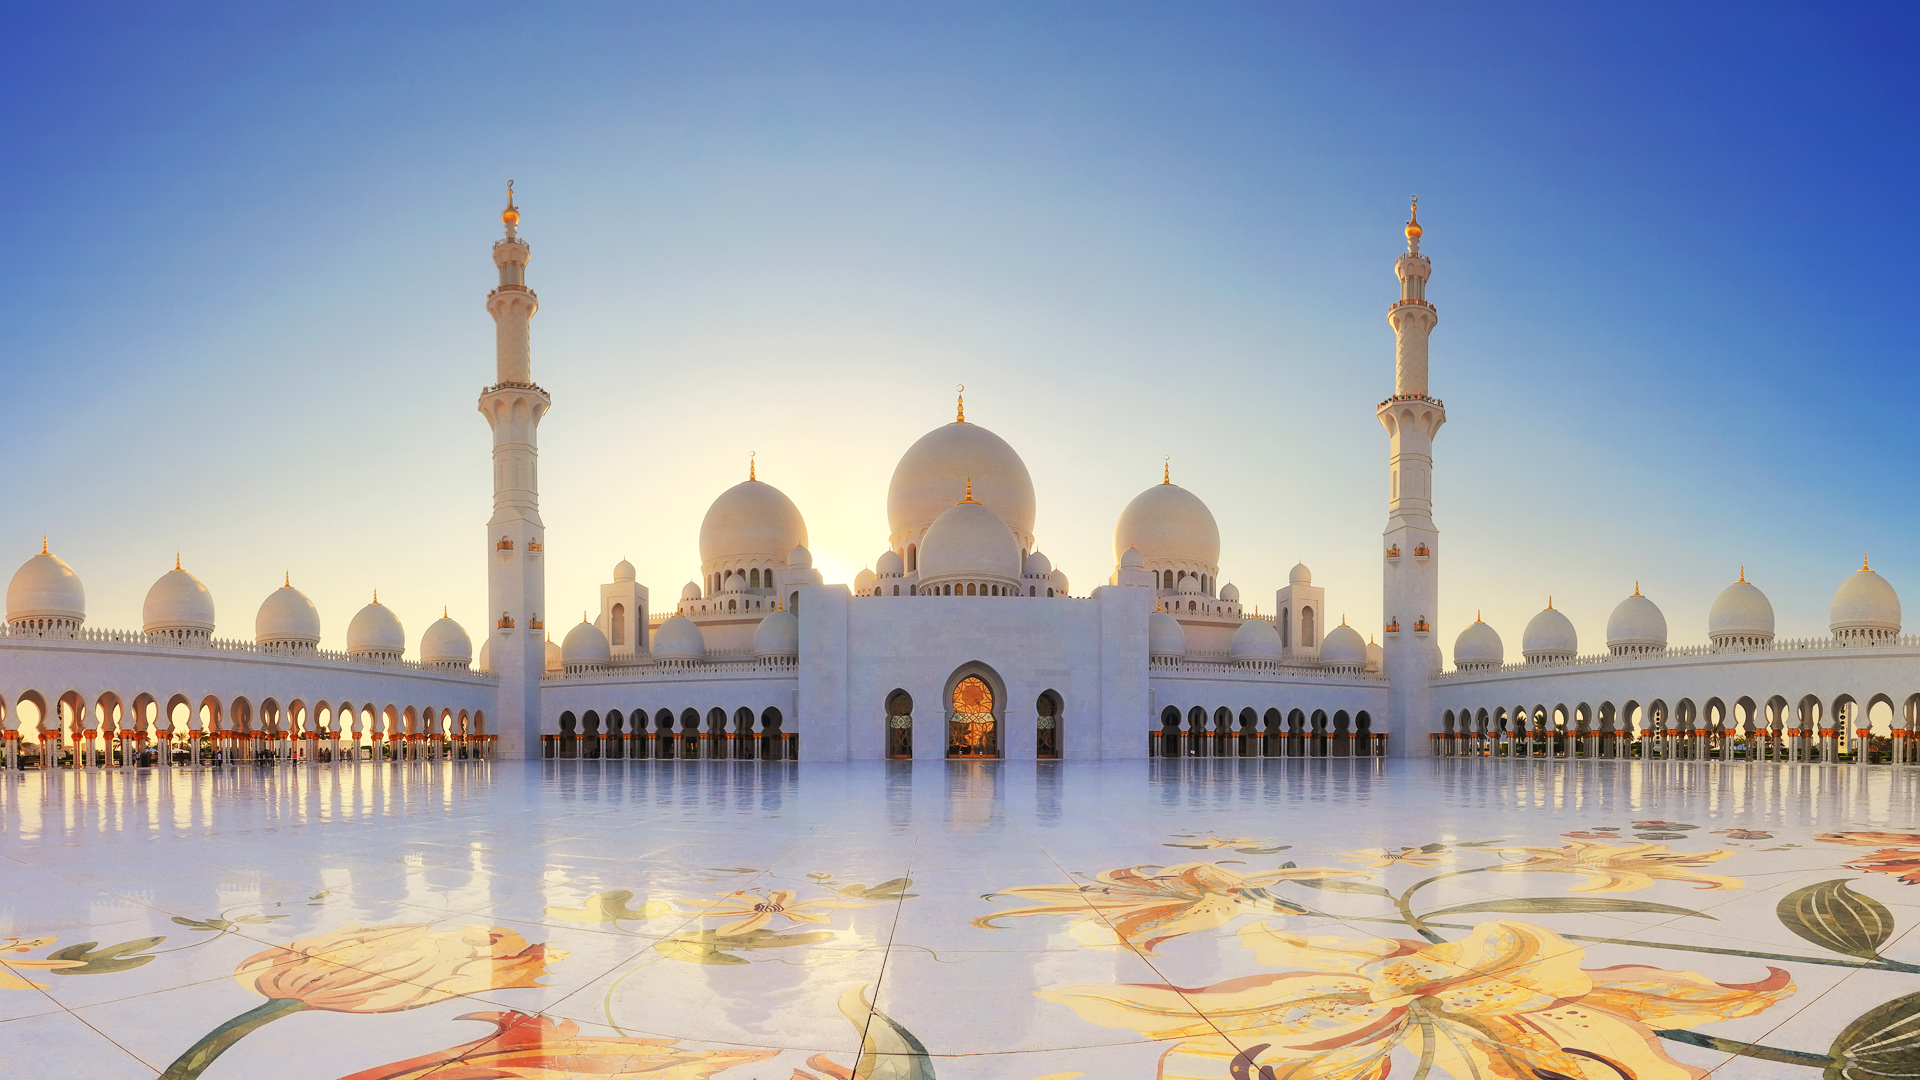 The Sheikh Zayed Grand Mosque in Abu Dhabi welcomed 235,700 believers and tourists in the first half of 2021